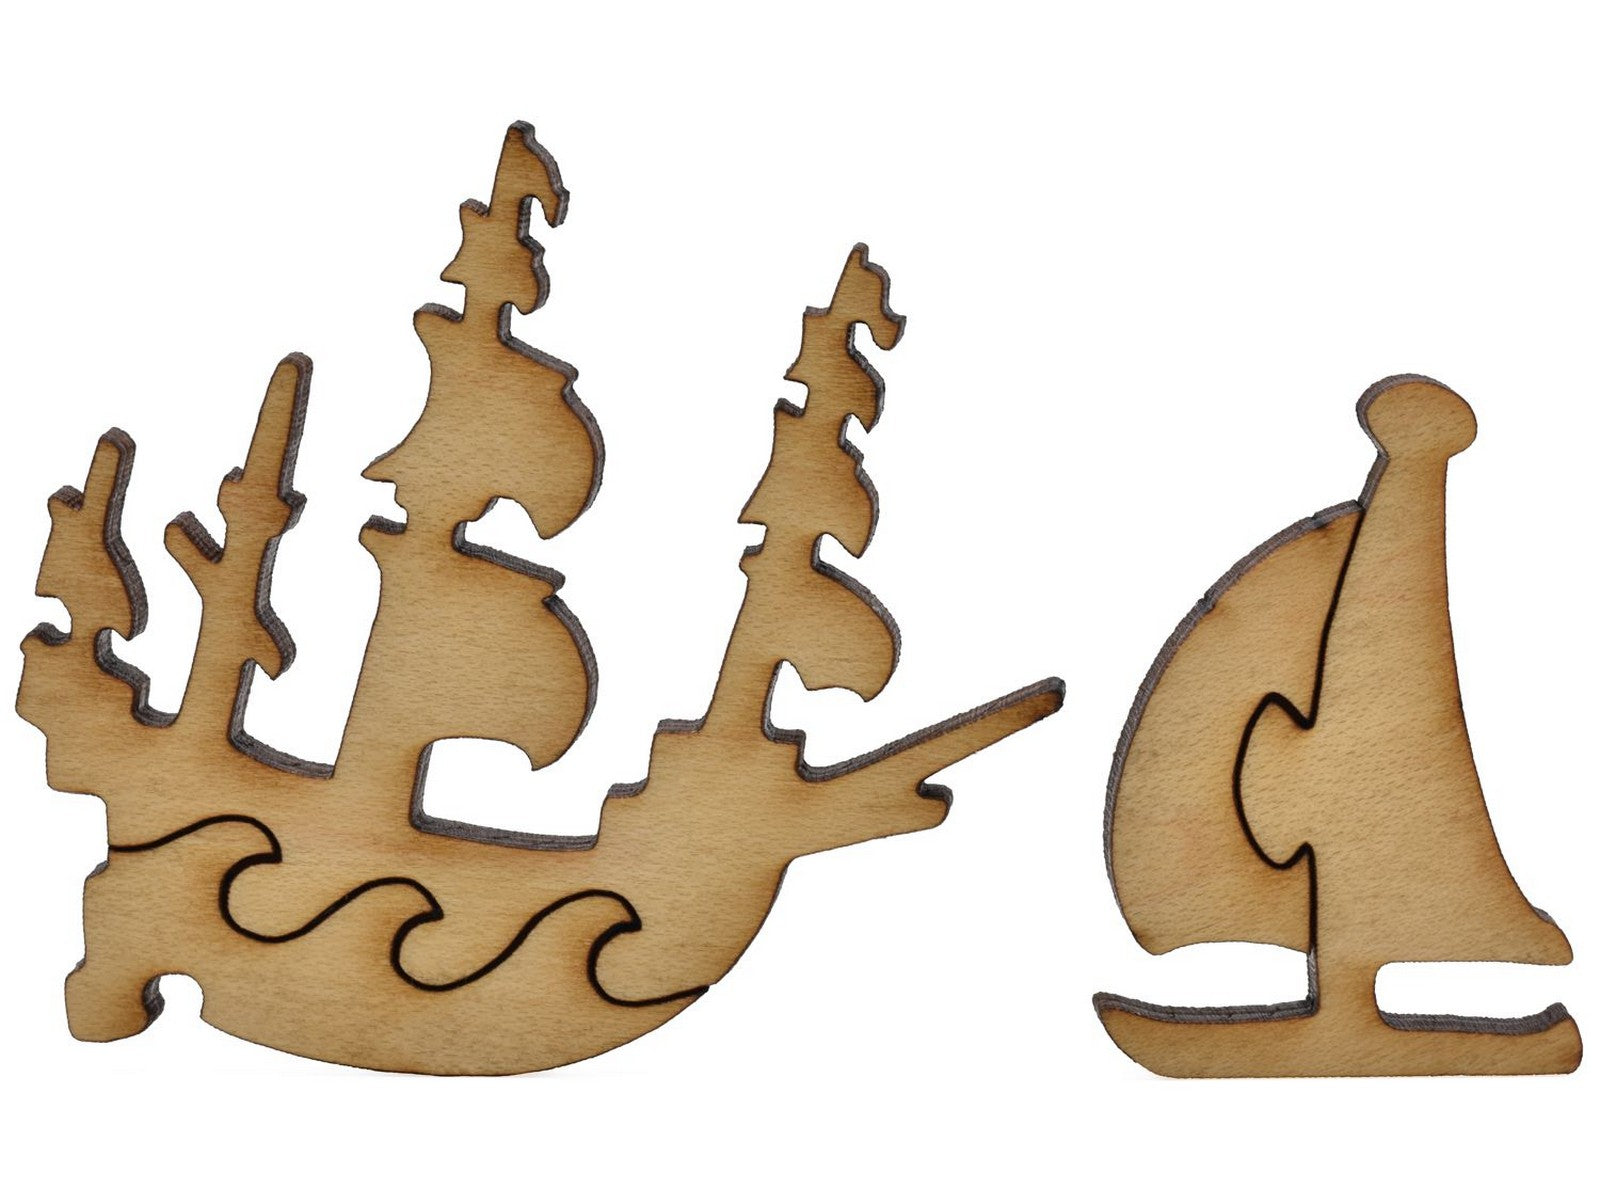 A closeup of pieces shaped like a clipper ship and a sailboat.